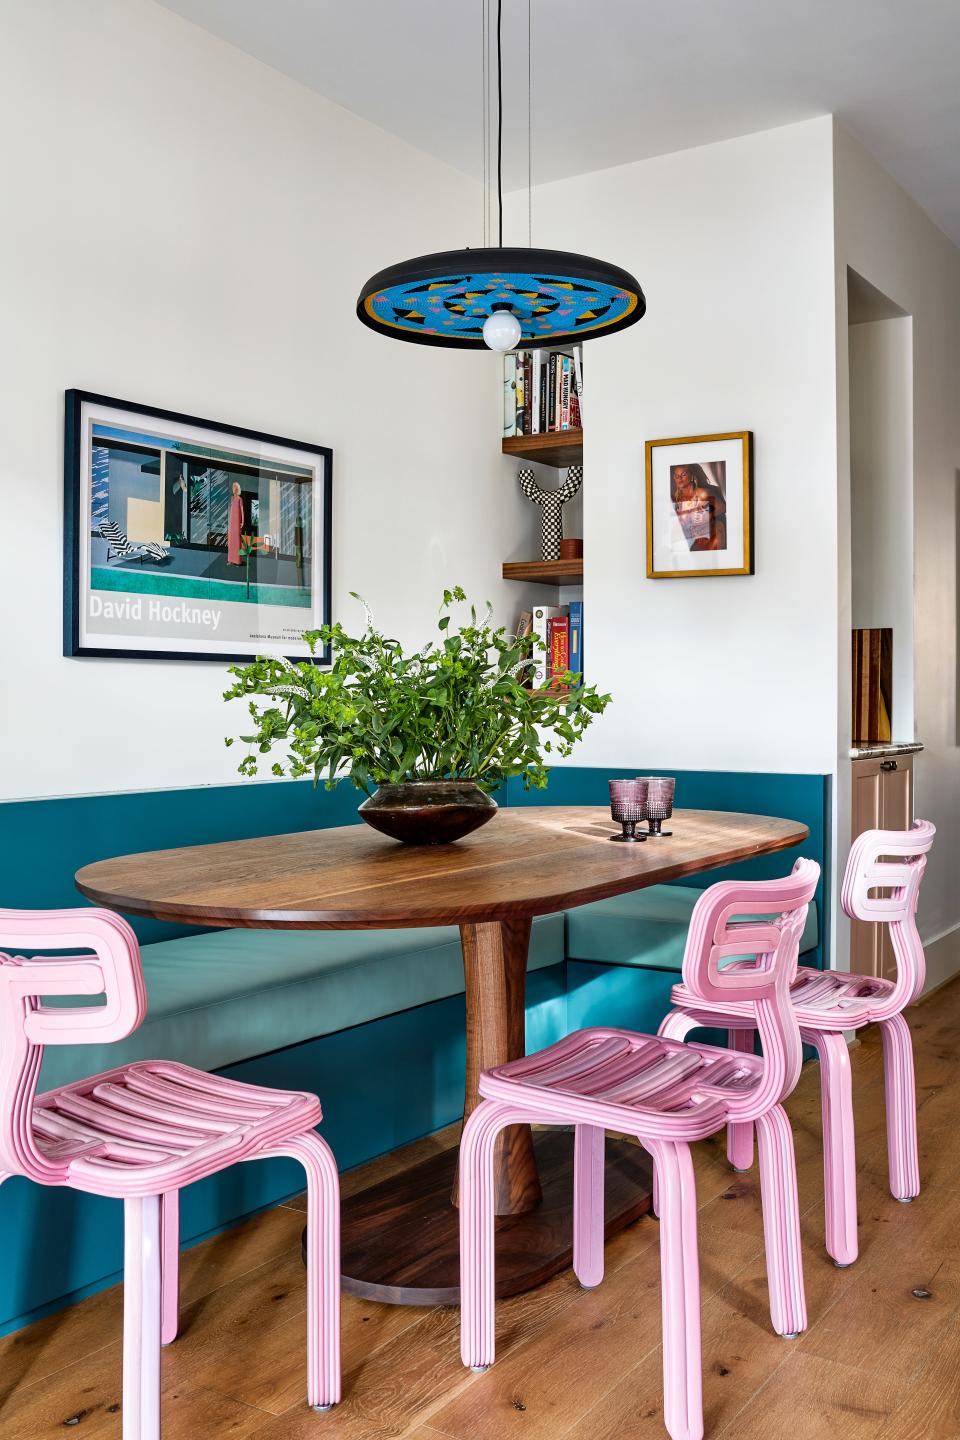 Who would have thought that the bubblegum pink chairs in the dining room were made of recycled plastic—or more precisely, from the upcycled plastic interiors of a standard-size fridge? Zoë, that’s who. She brought in the Chubby chairs by Kooij both as a conversation starter and as a playful counterpoint to the Fajen & Brown custom banquette outfitted in Kravet’s Rock Solid faux leather in the shade Patina. “They’re much sturdier than they look,” says one husband. The restraint of Loewen Design Studio’s Walnut Jarvis Racetrack Oval pedestal table offsets the surrounding palette. Artworks include a David Hockney lithograph (left) and an autographed portrait of Anna Nicole Smith. The pendant is the Alfred design by Always Welcome.